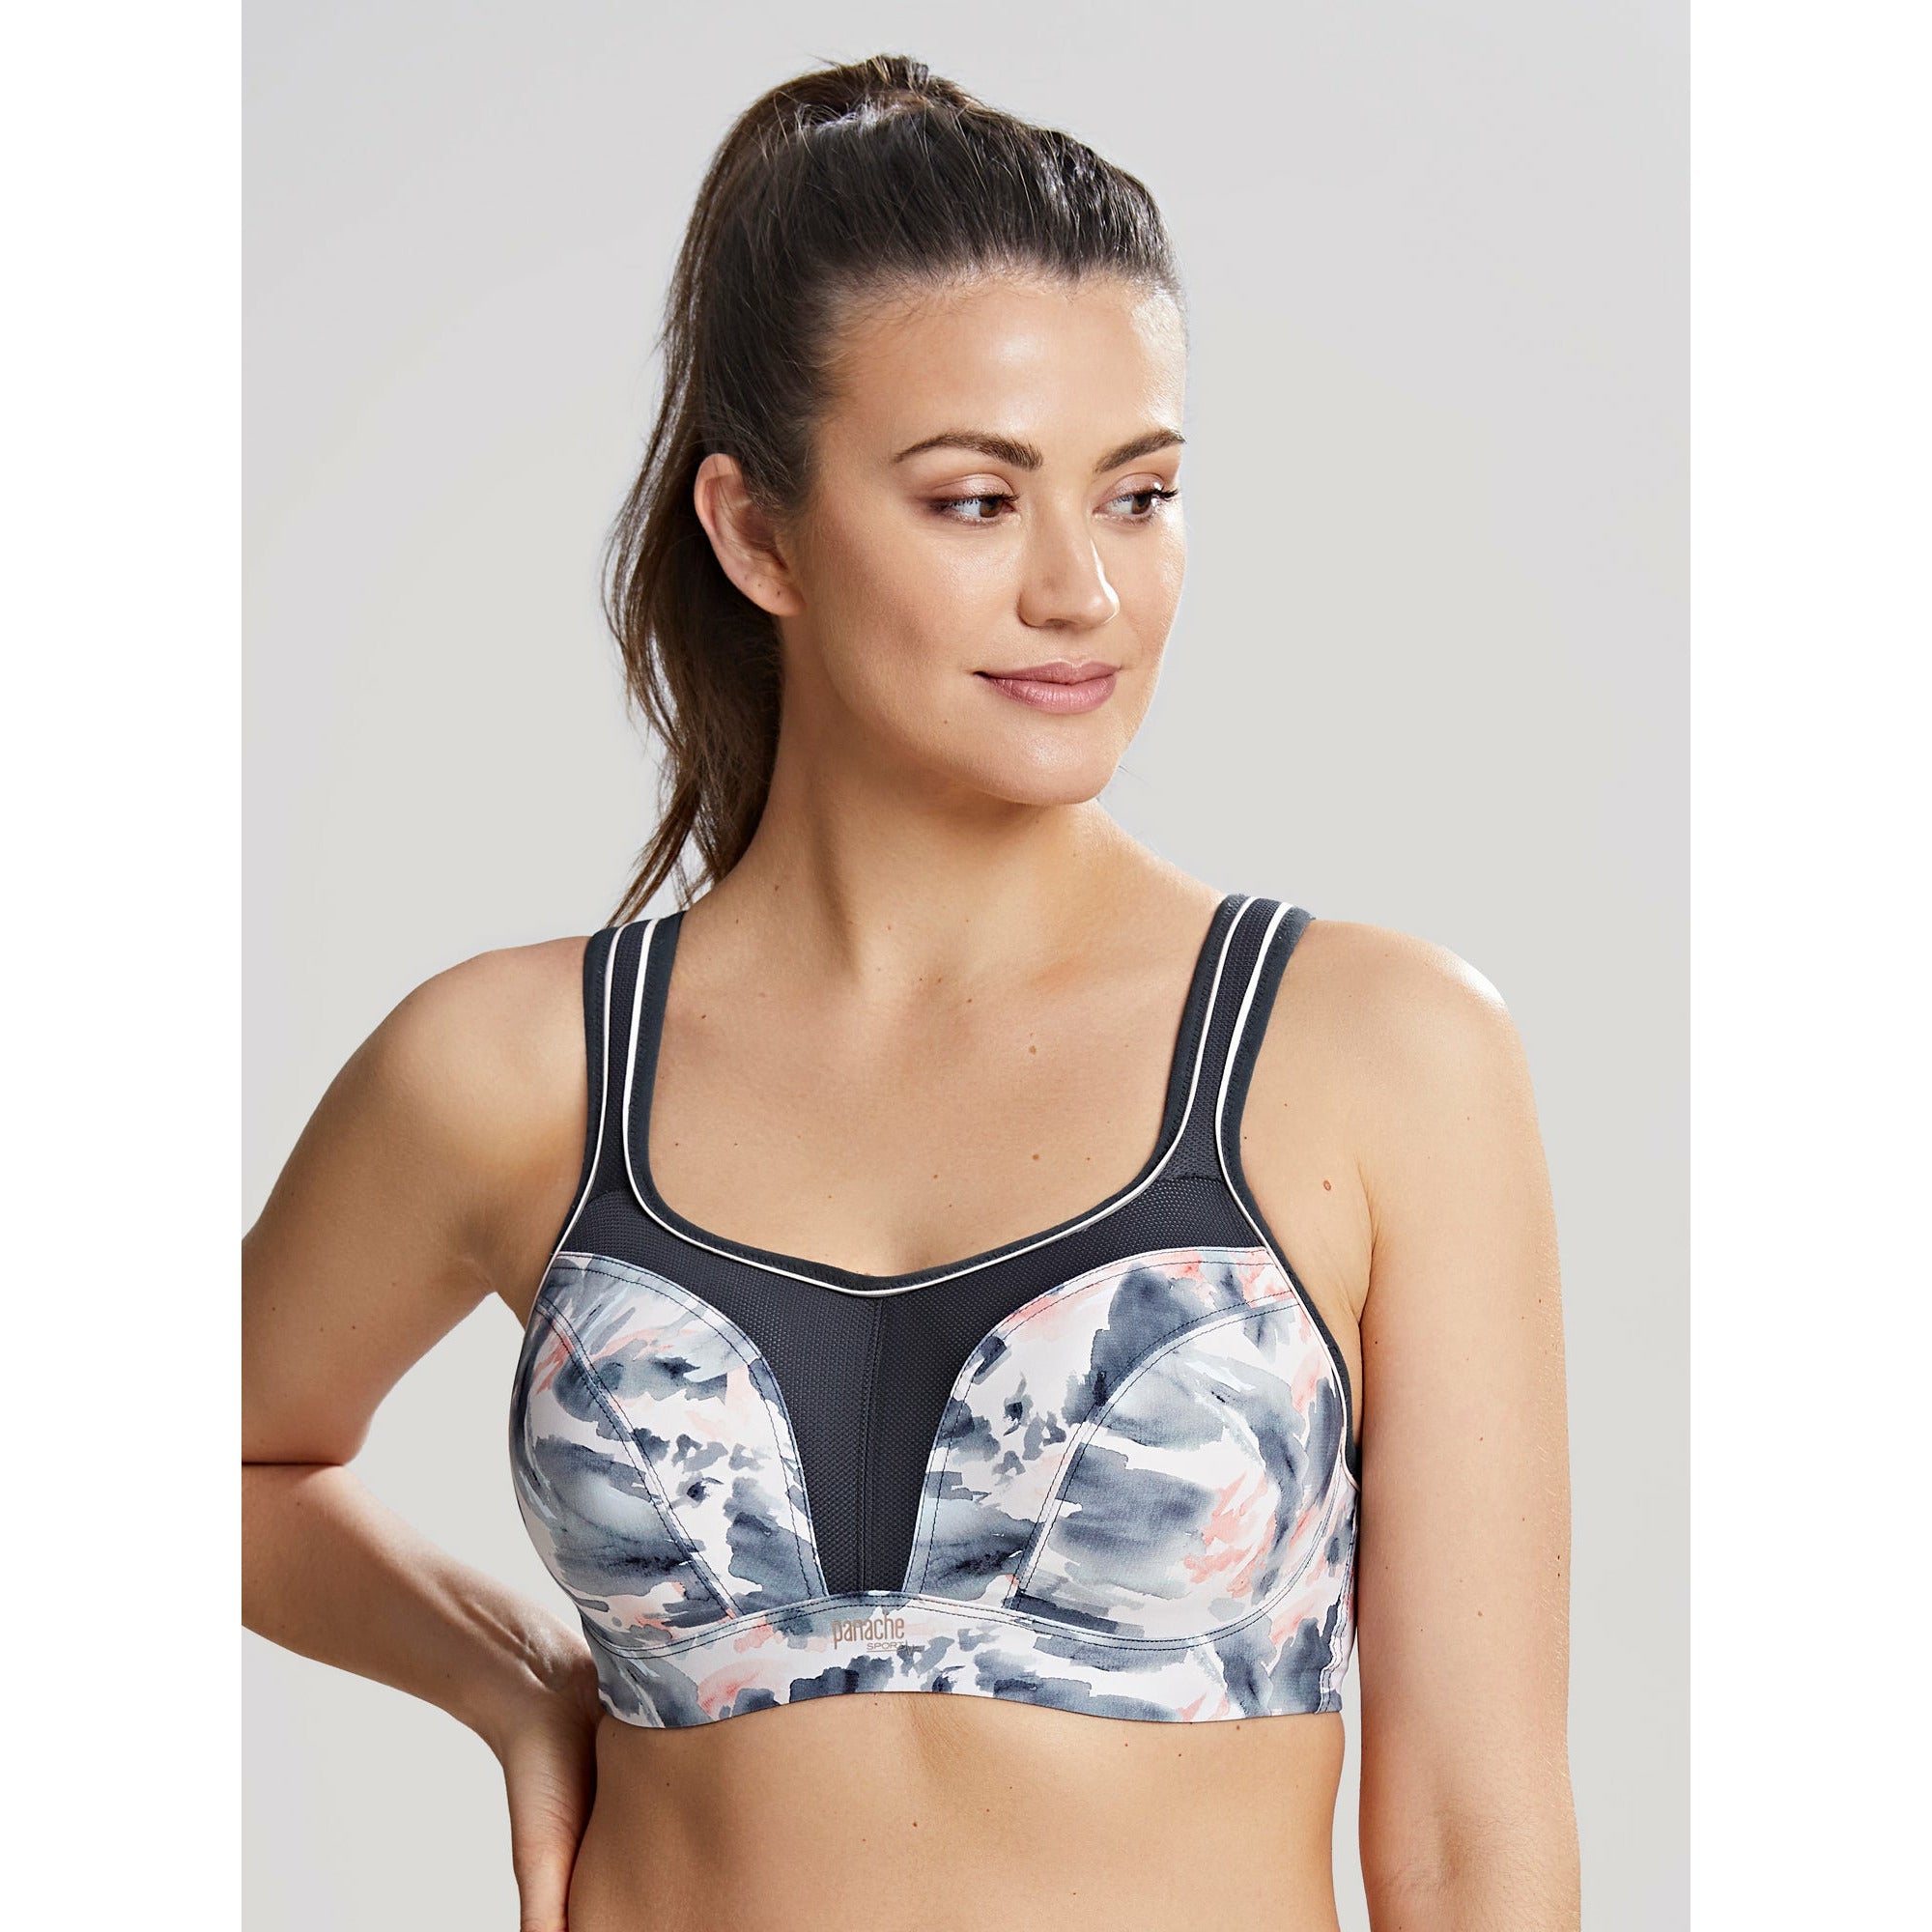 Panache Cleo Lyzy Non-Wired Triangle - Black – The Lady's Slip